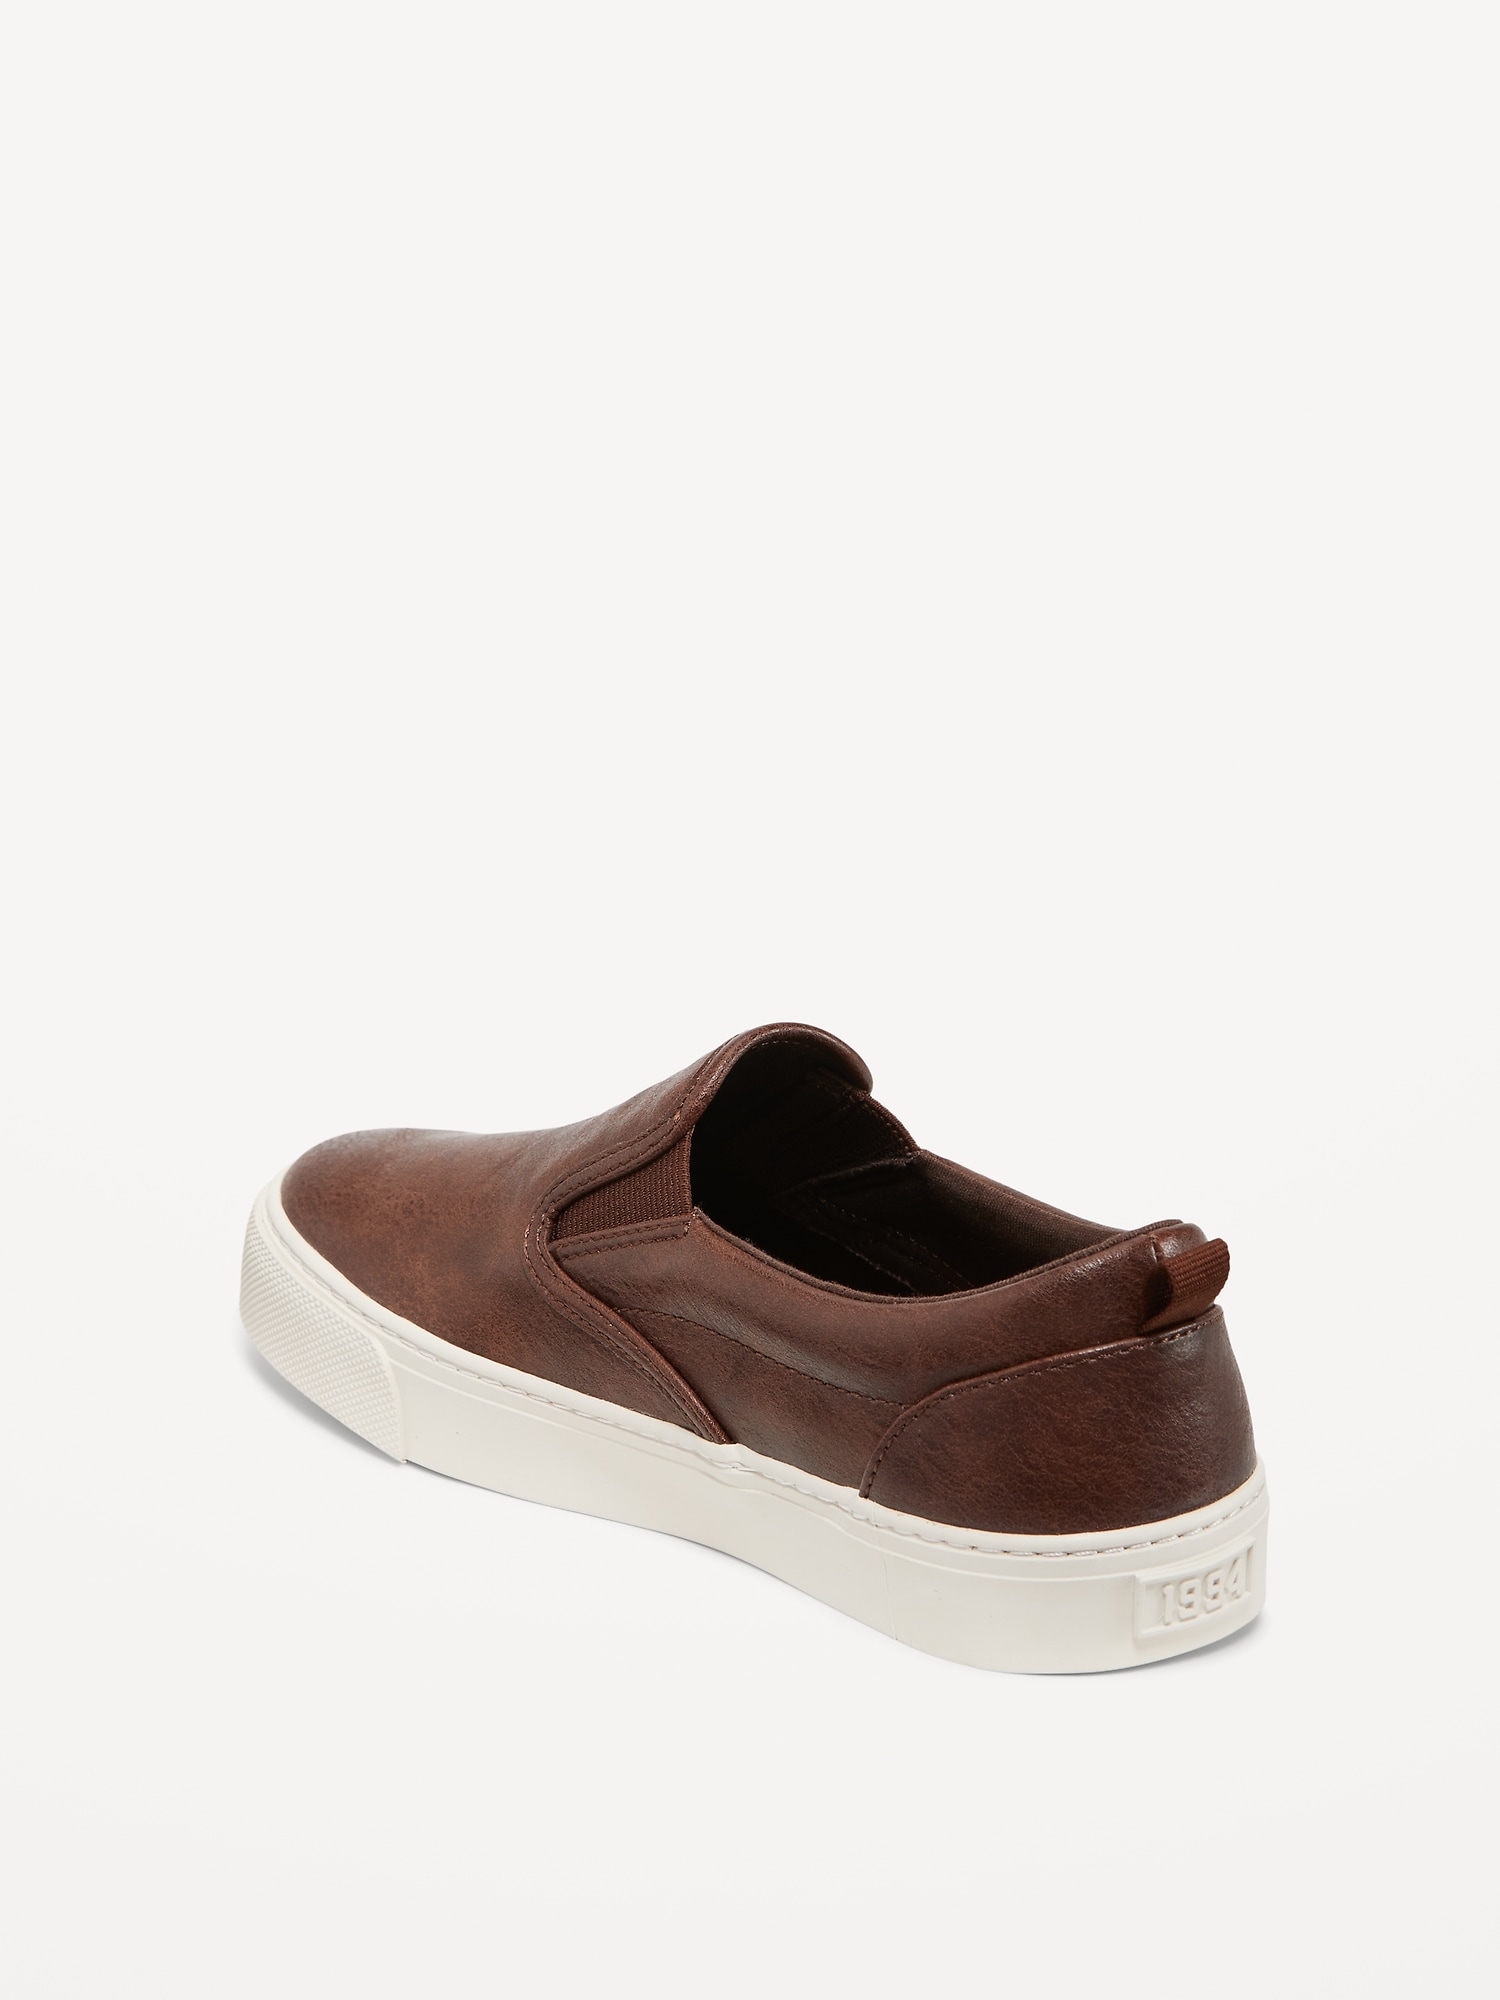 Canvas Slip-On Sneakers for Boys | Old Navy